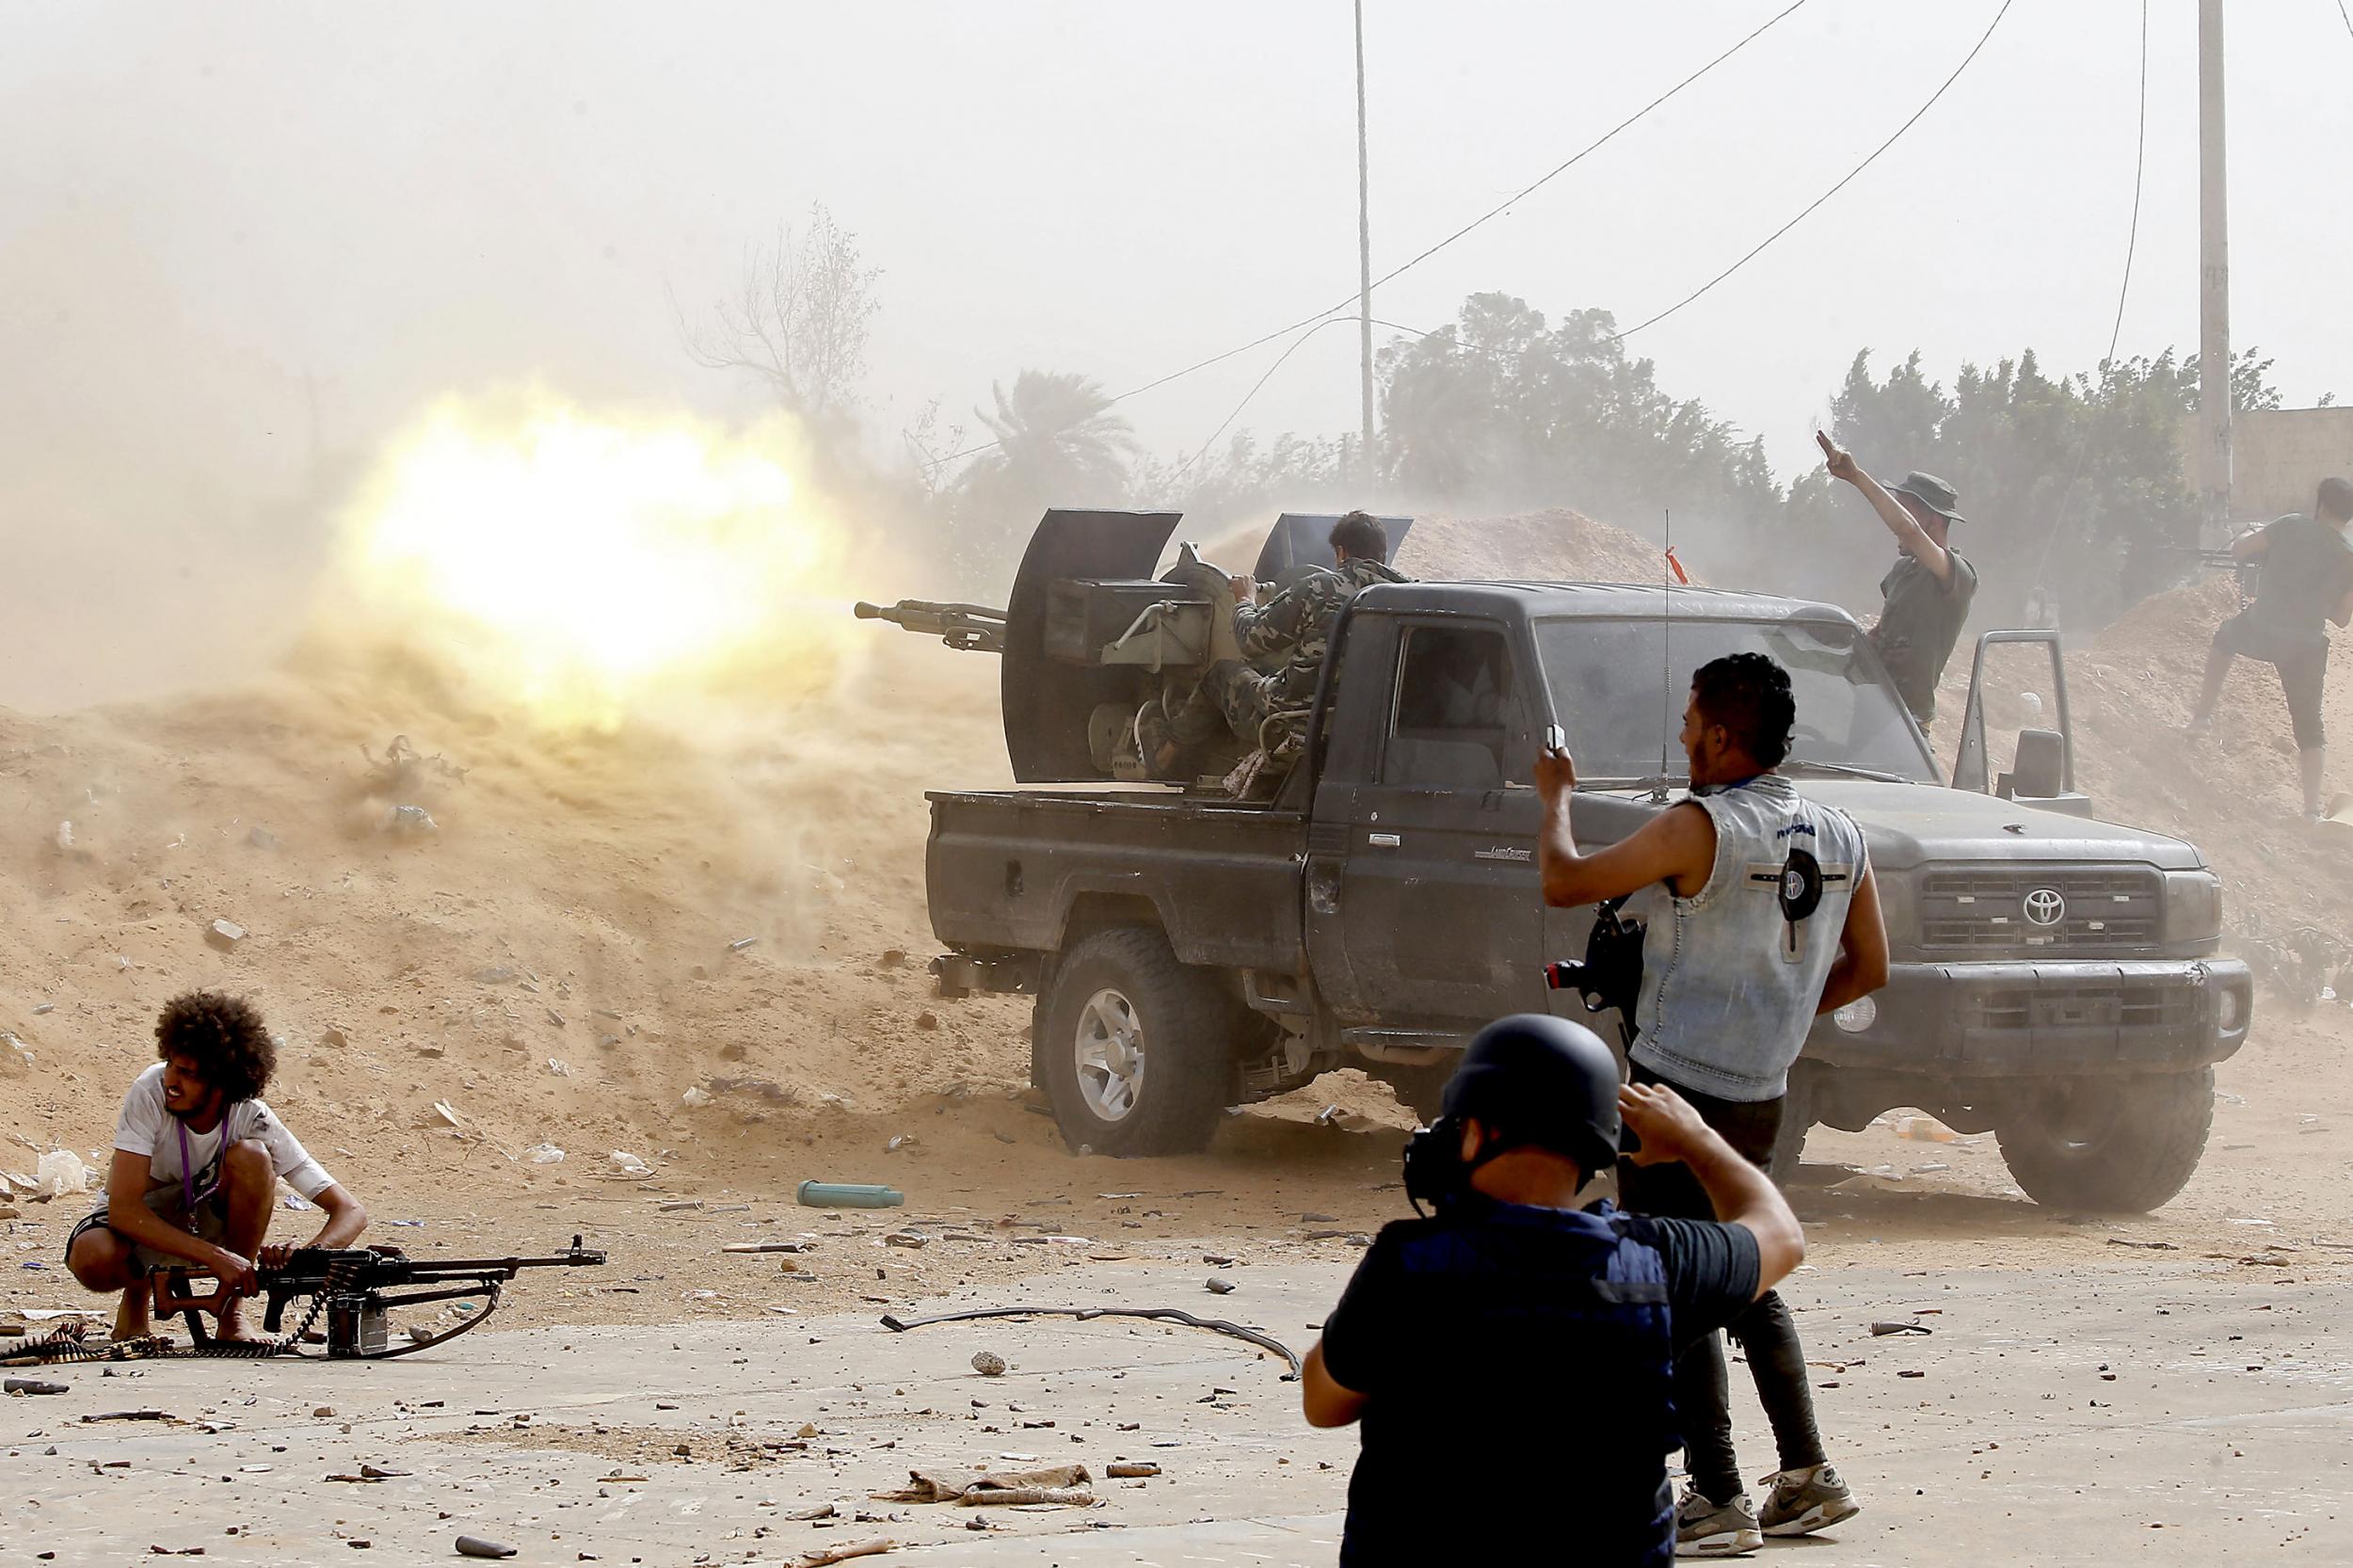 A GNA fighter fires a heavy machine gun at rival forces south of the captial (AFP/Getty)